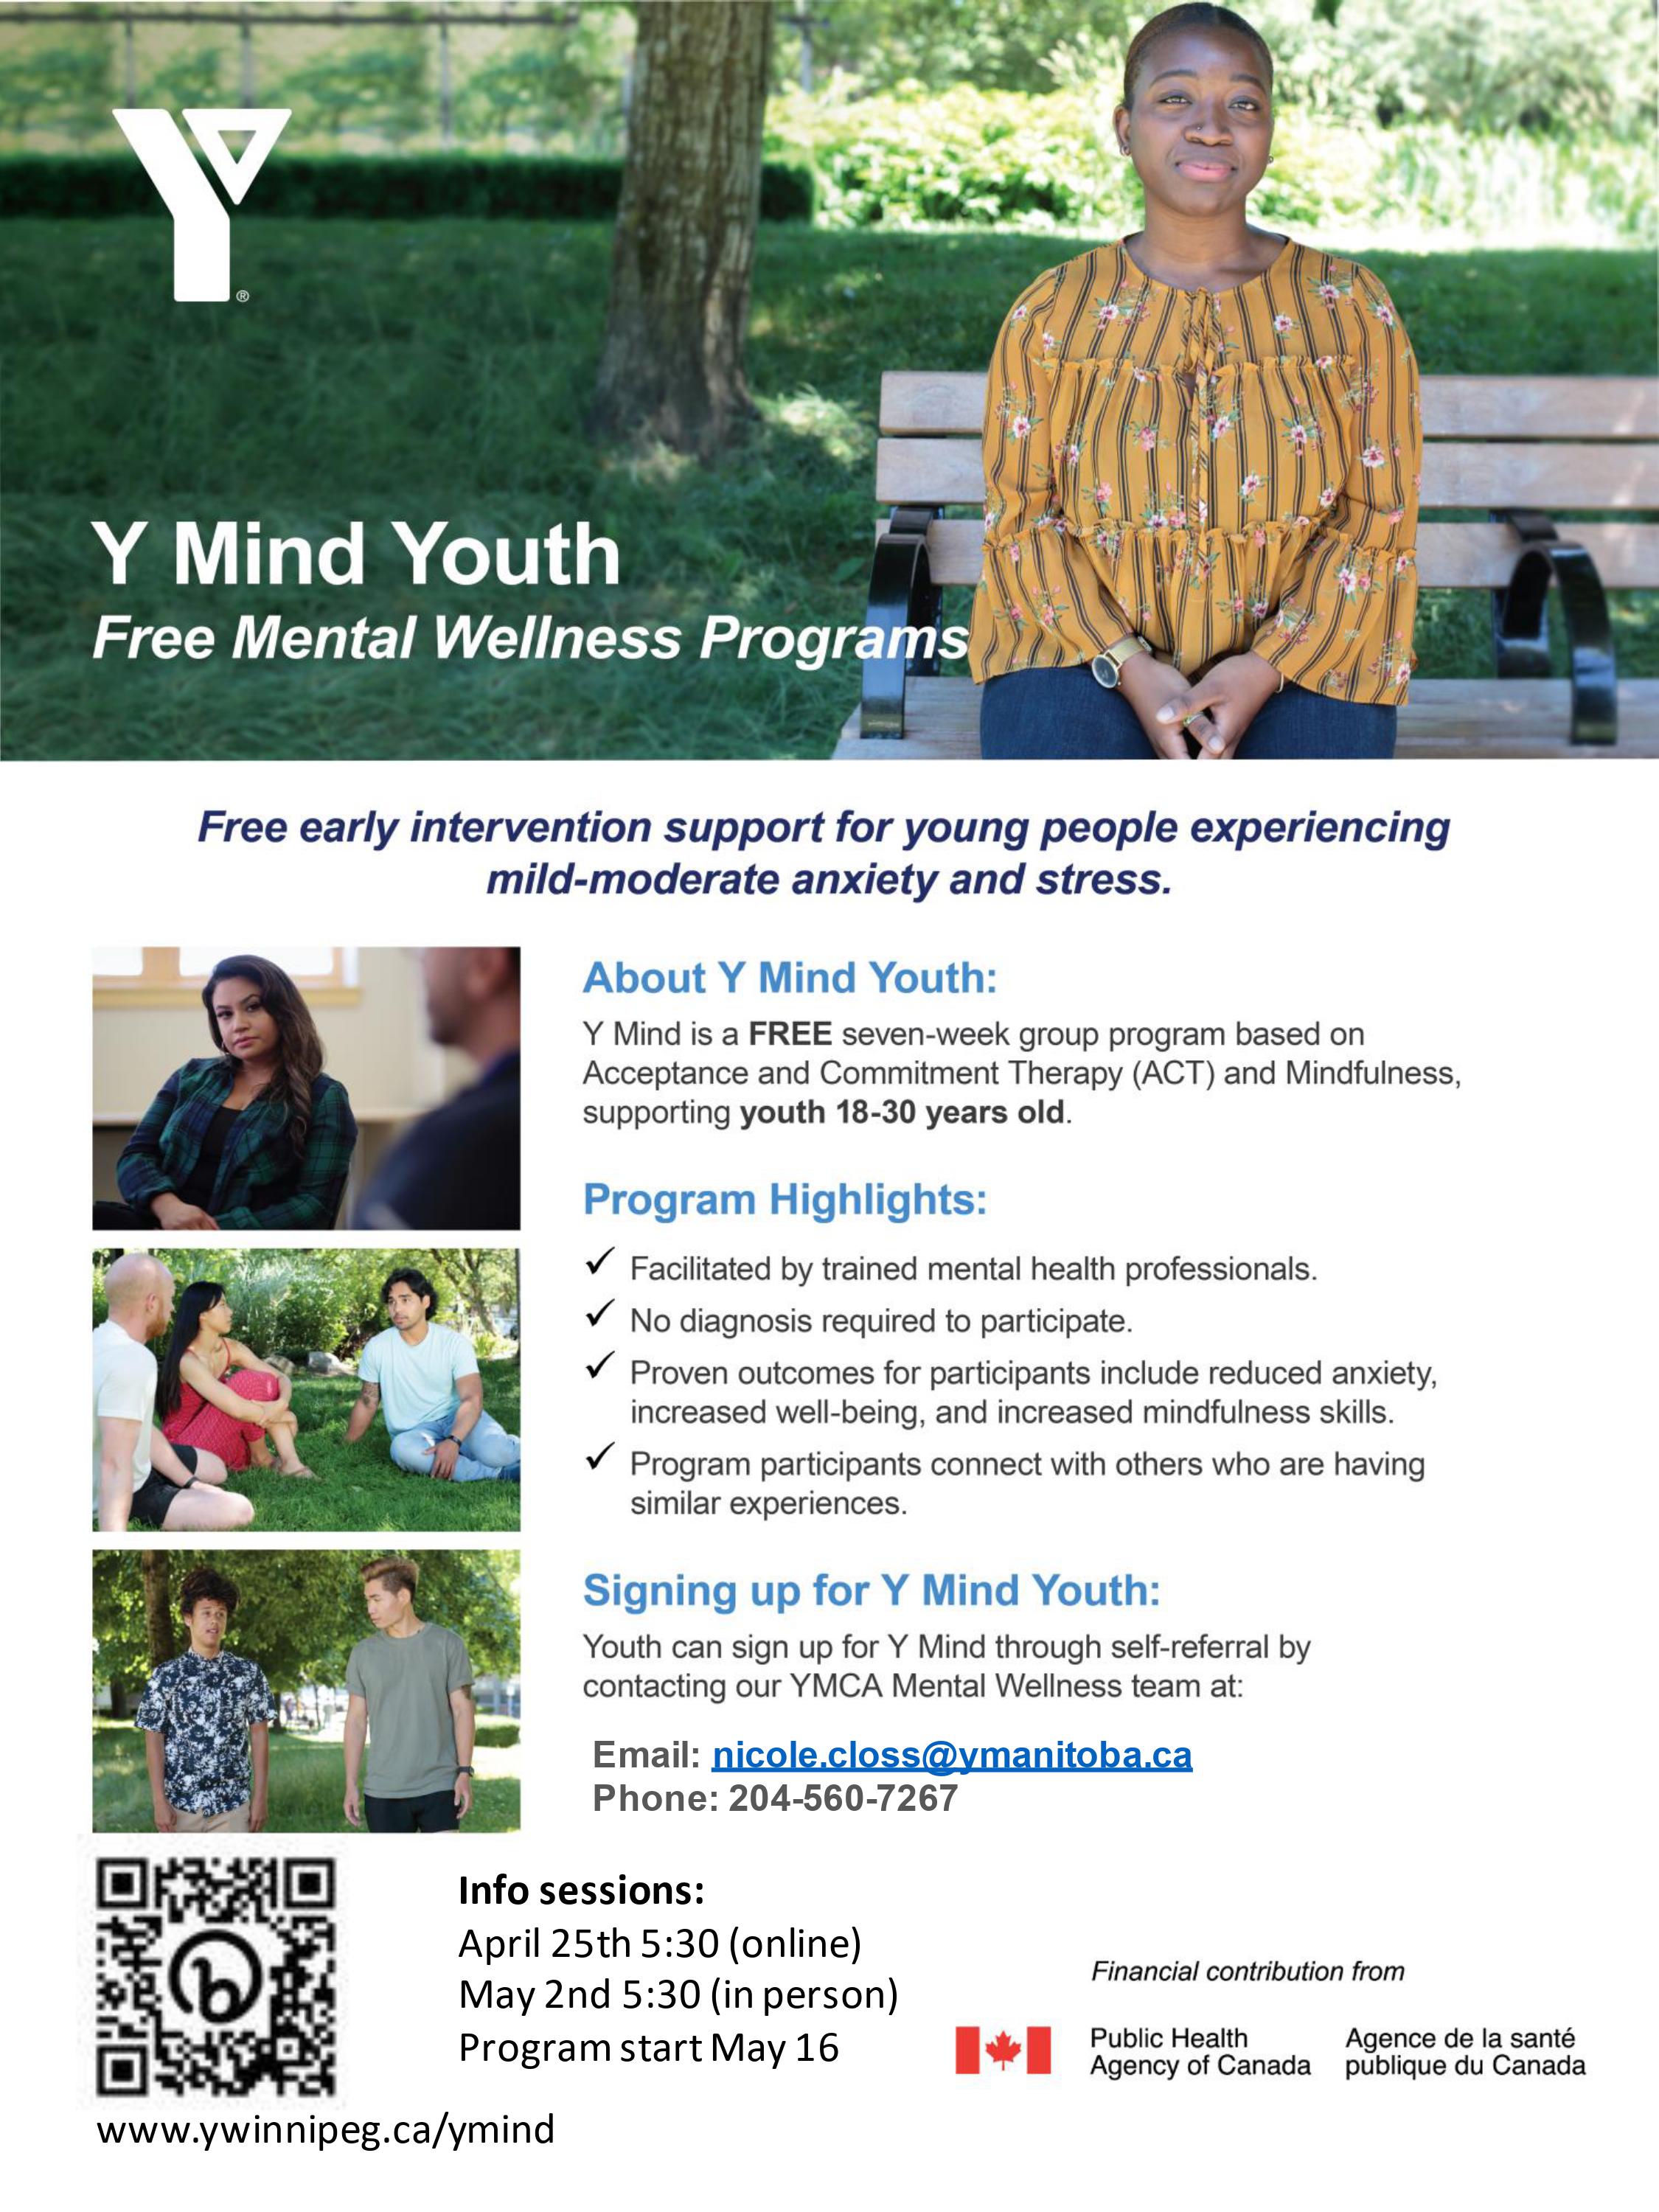 Y Mind Youth Free Mental Wellness Programs Poster